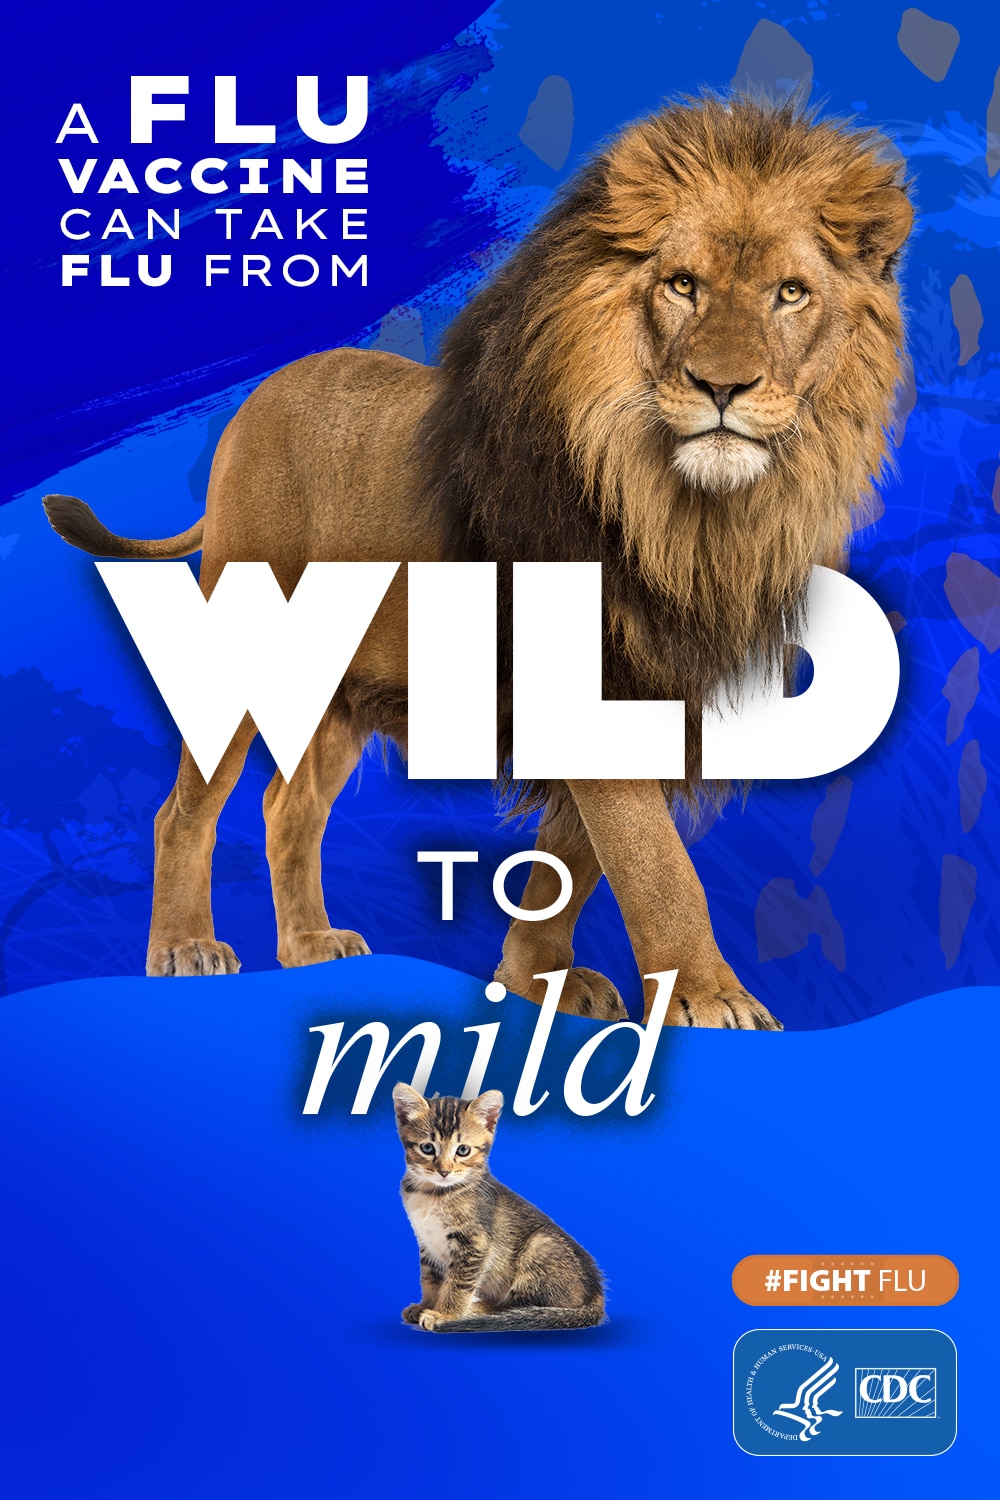 lion and kitten with text: A flu vaccine can take flu from wild to mild #fightflu CDC logo